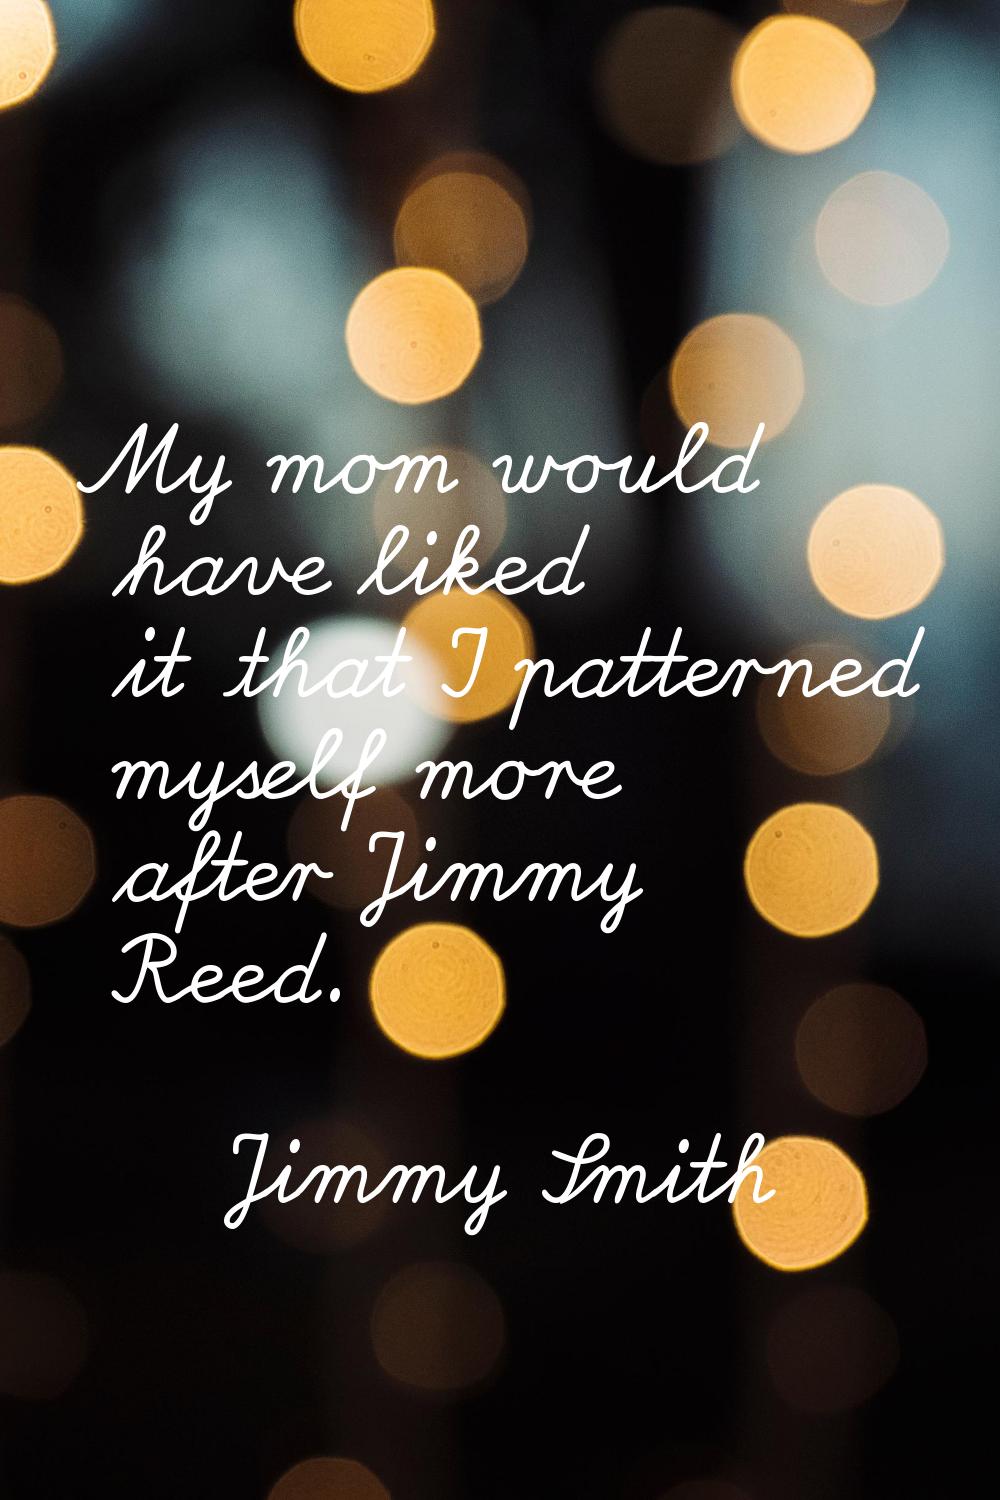 My mom would have liked it that I patterned myself more after Jimmy Reed.